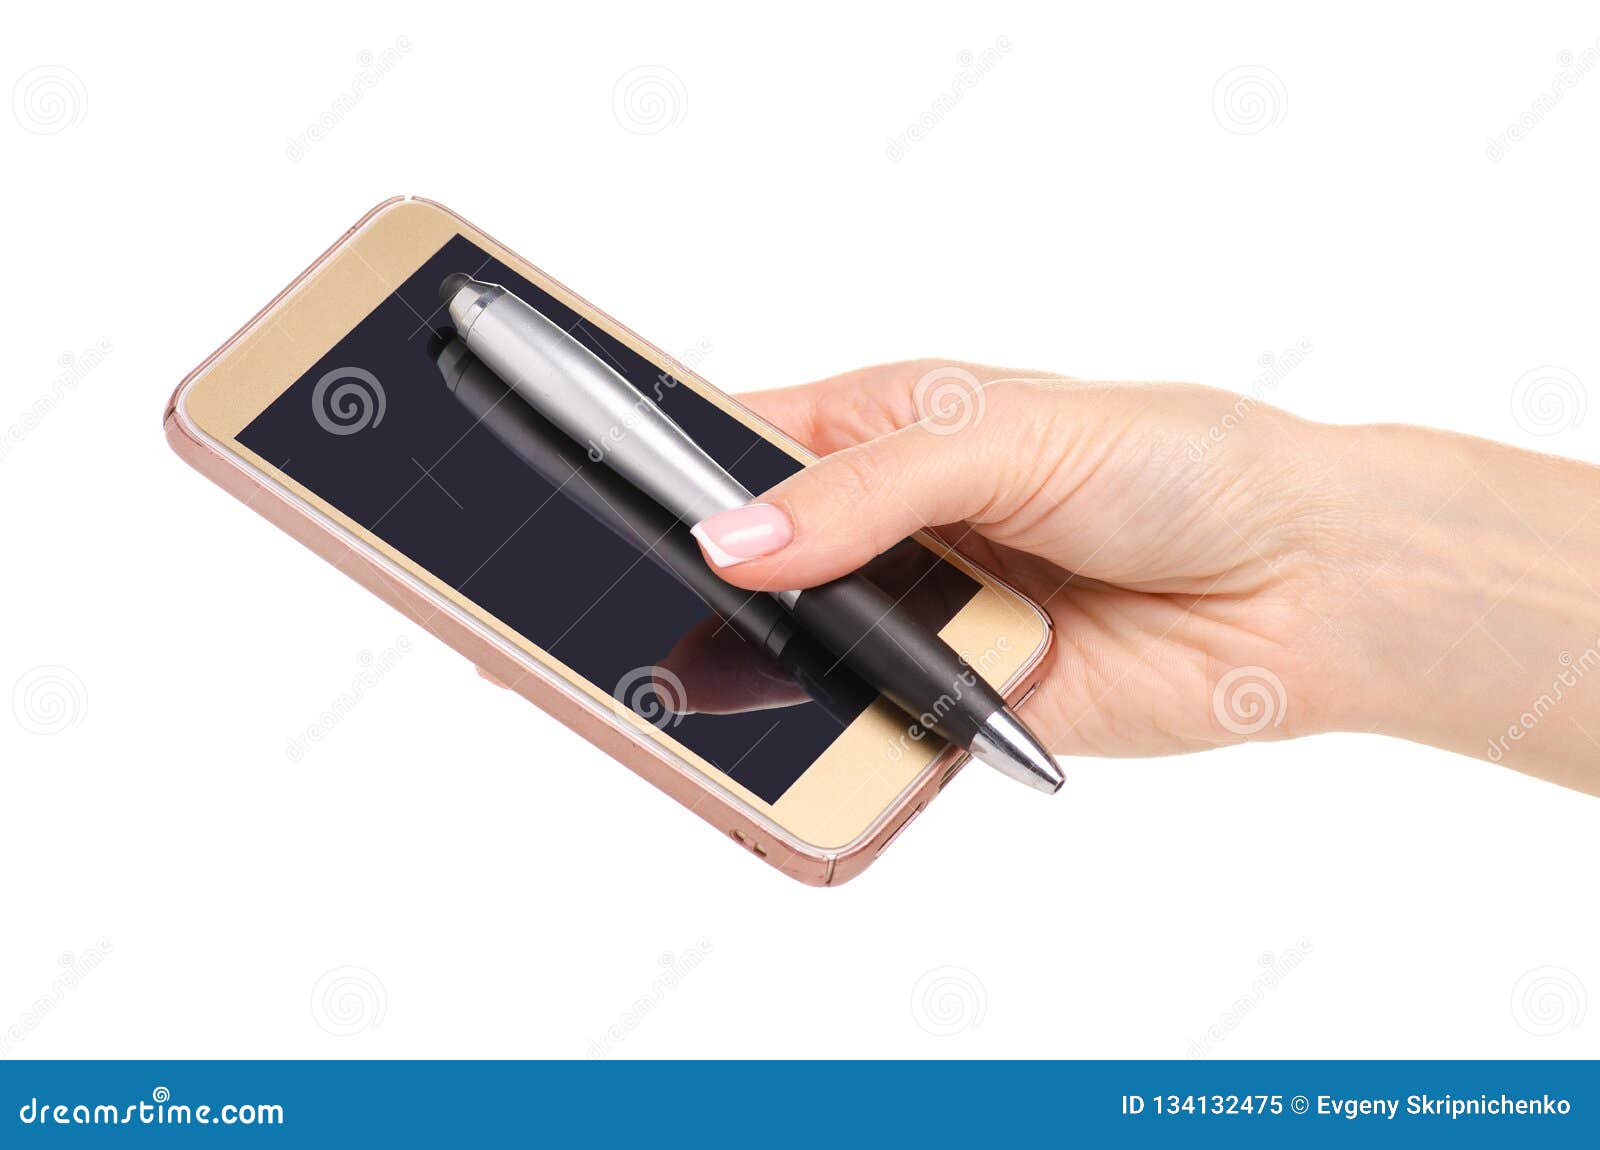 A hand holding a silver stylus pen touching the screen of a gold smartphone.